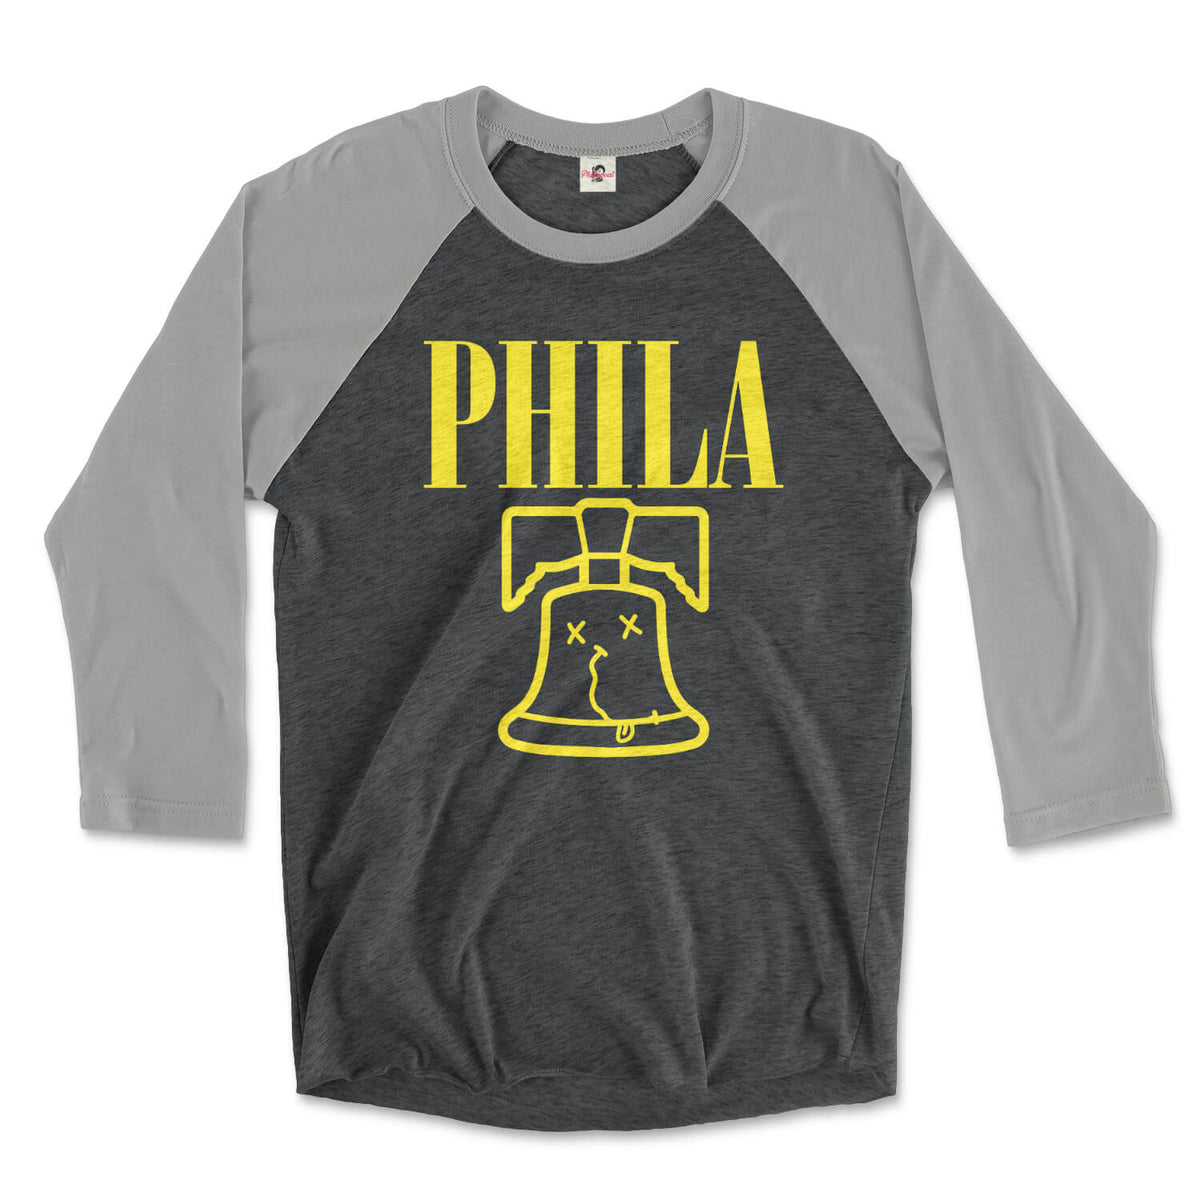 philadelphia nirvana logo design with phila over a liberty bell smiley face on a premium heather grey and vintage black 3/4 long sleeve raglan tee from phillygoat